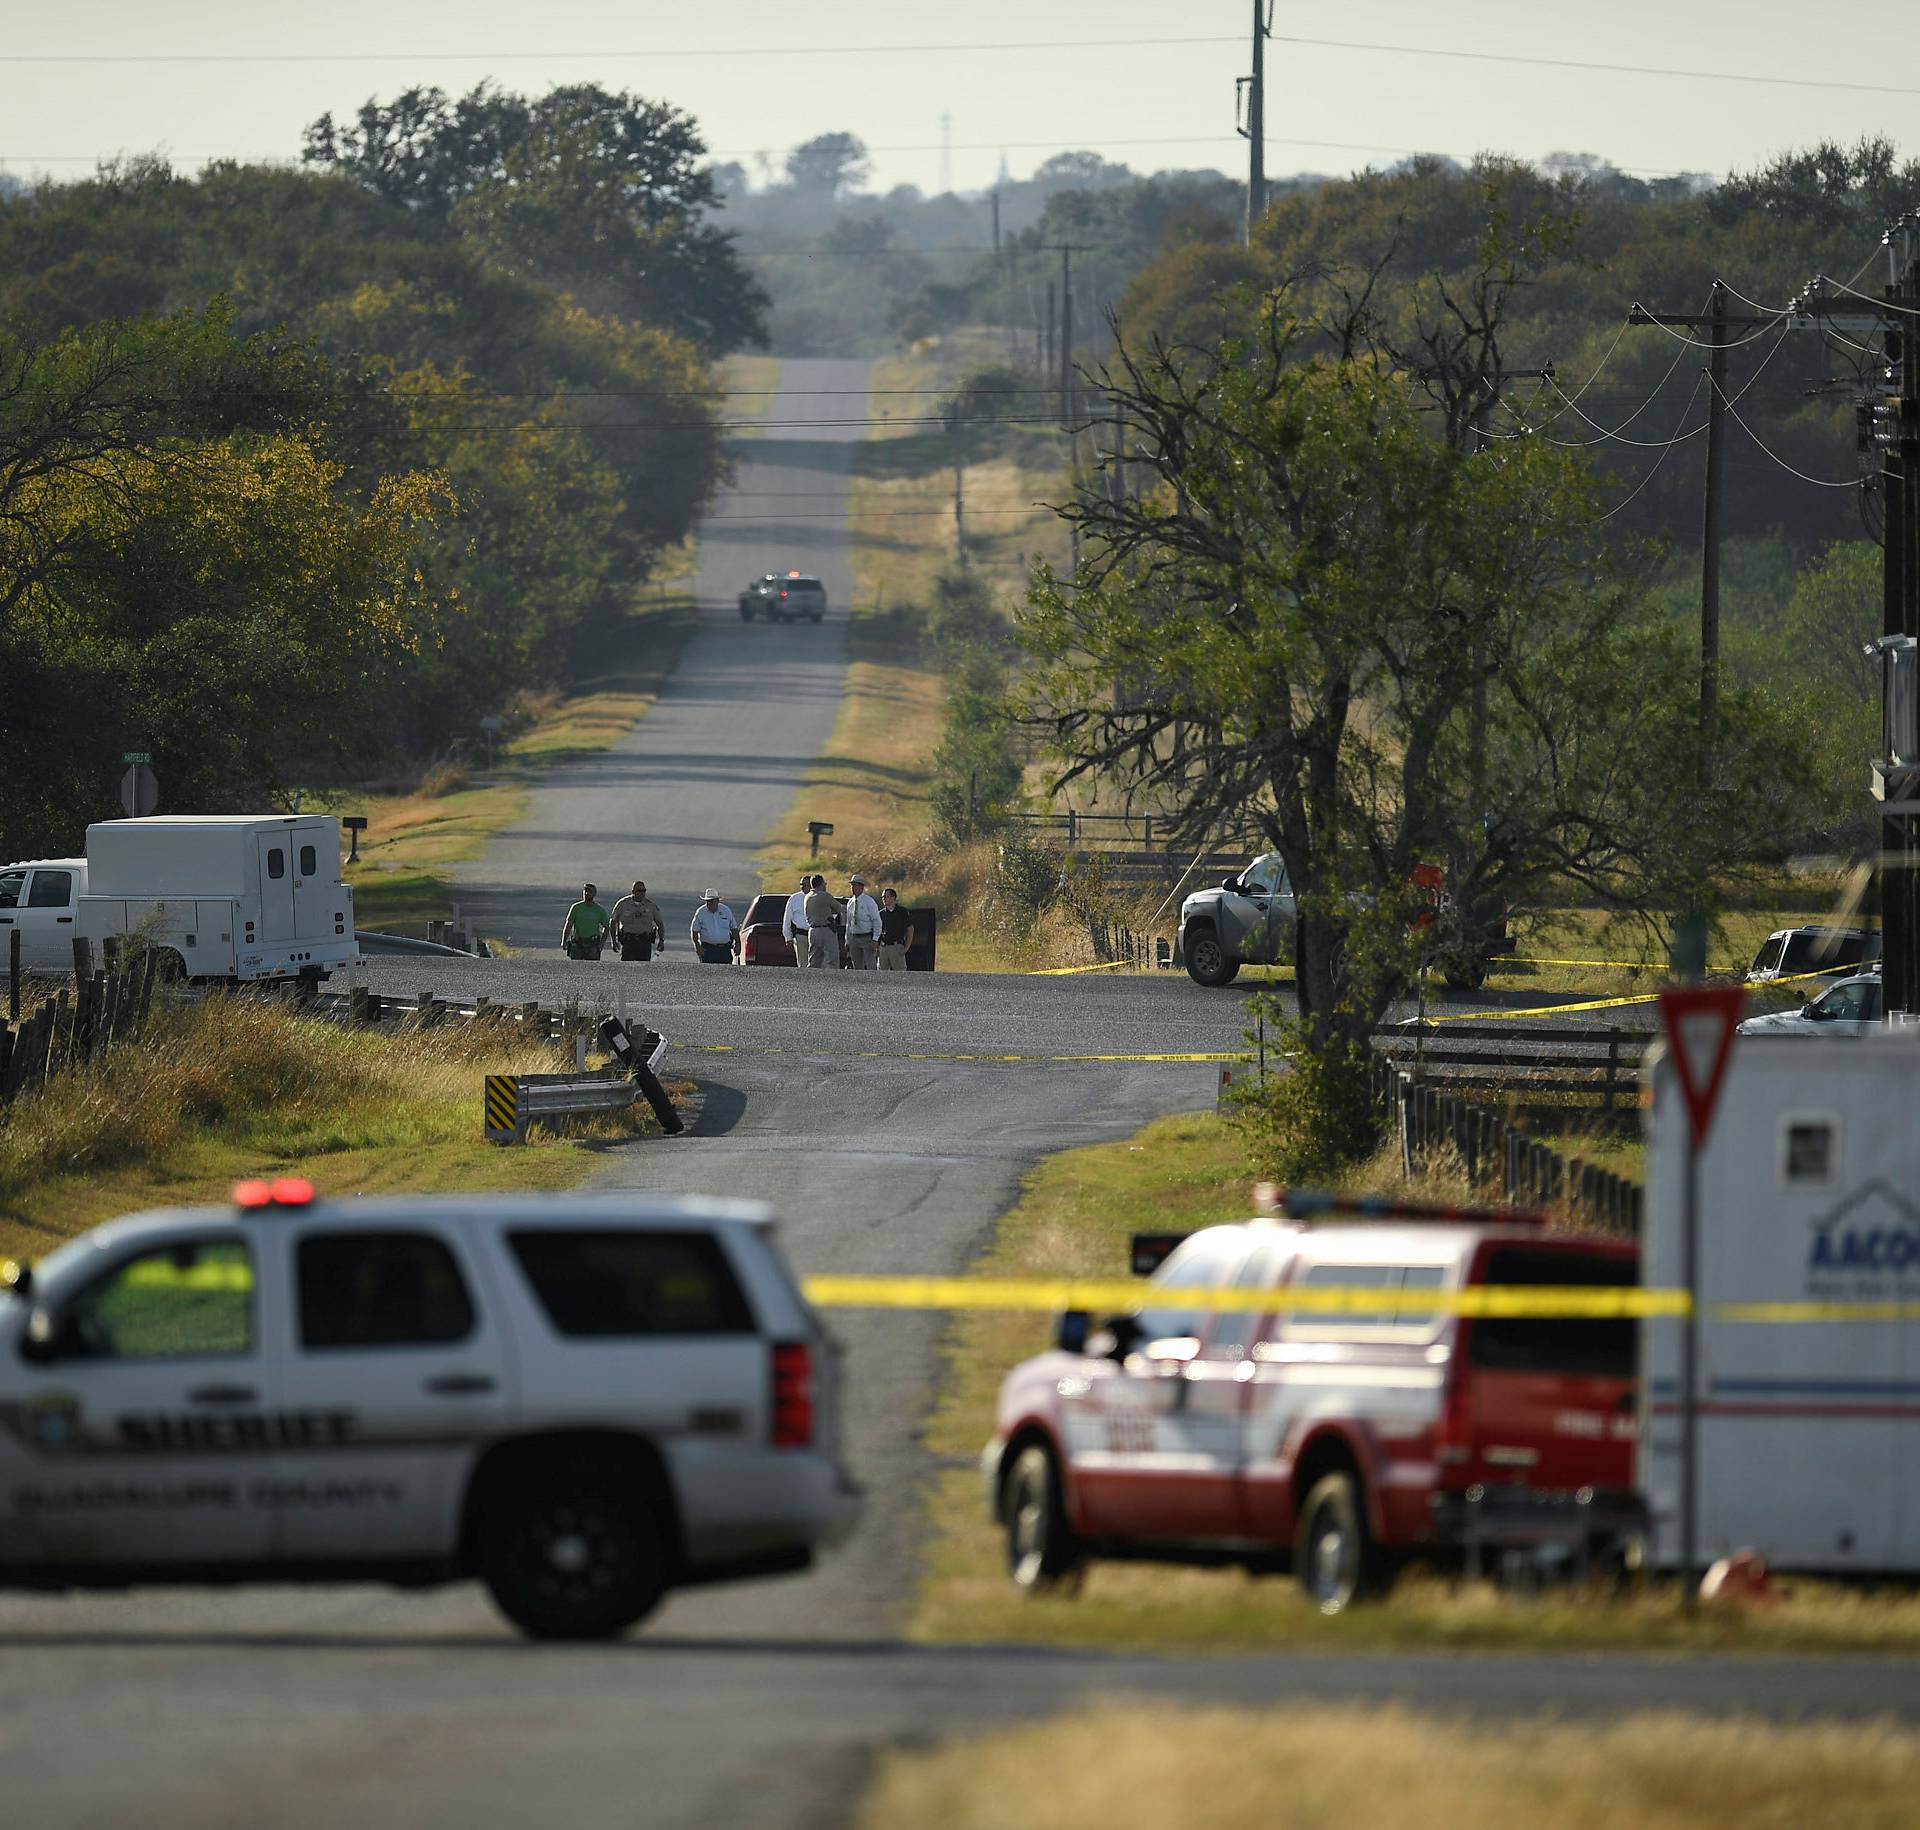 Law enforcement set up a cordon along an intersection in the aftermath of a mass shooting in Sutherland Springs, Texas